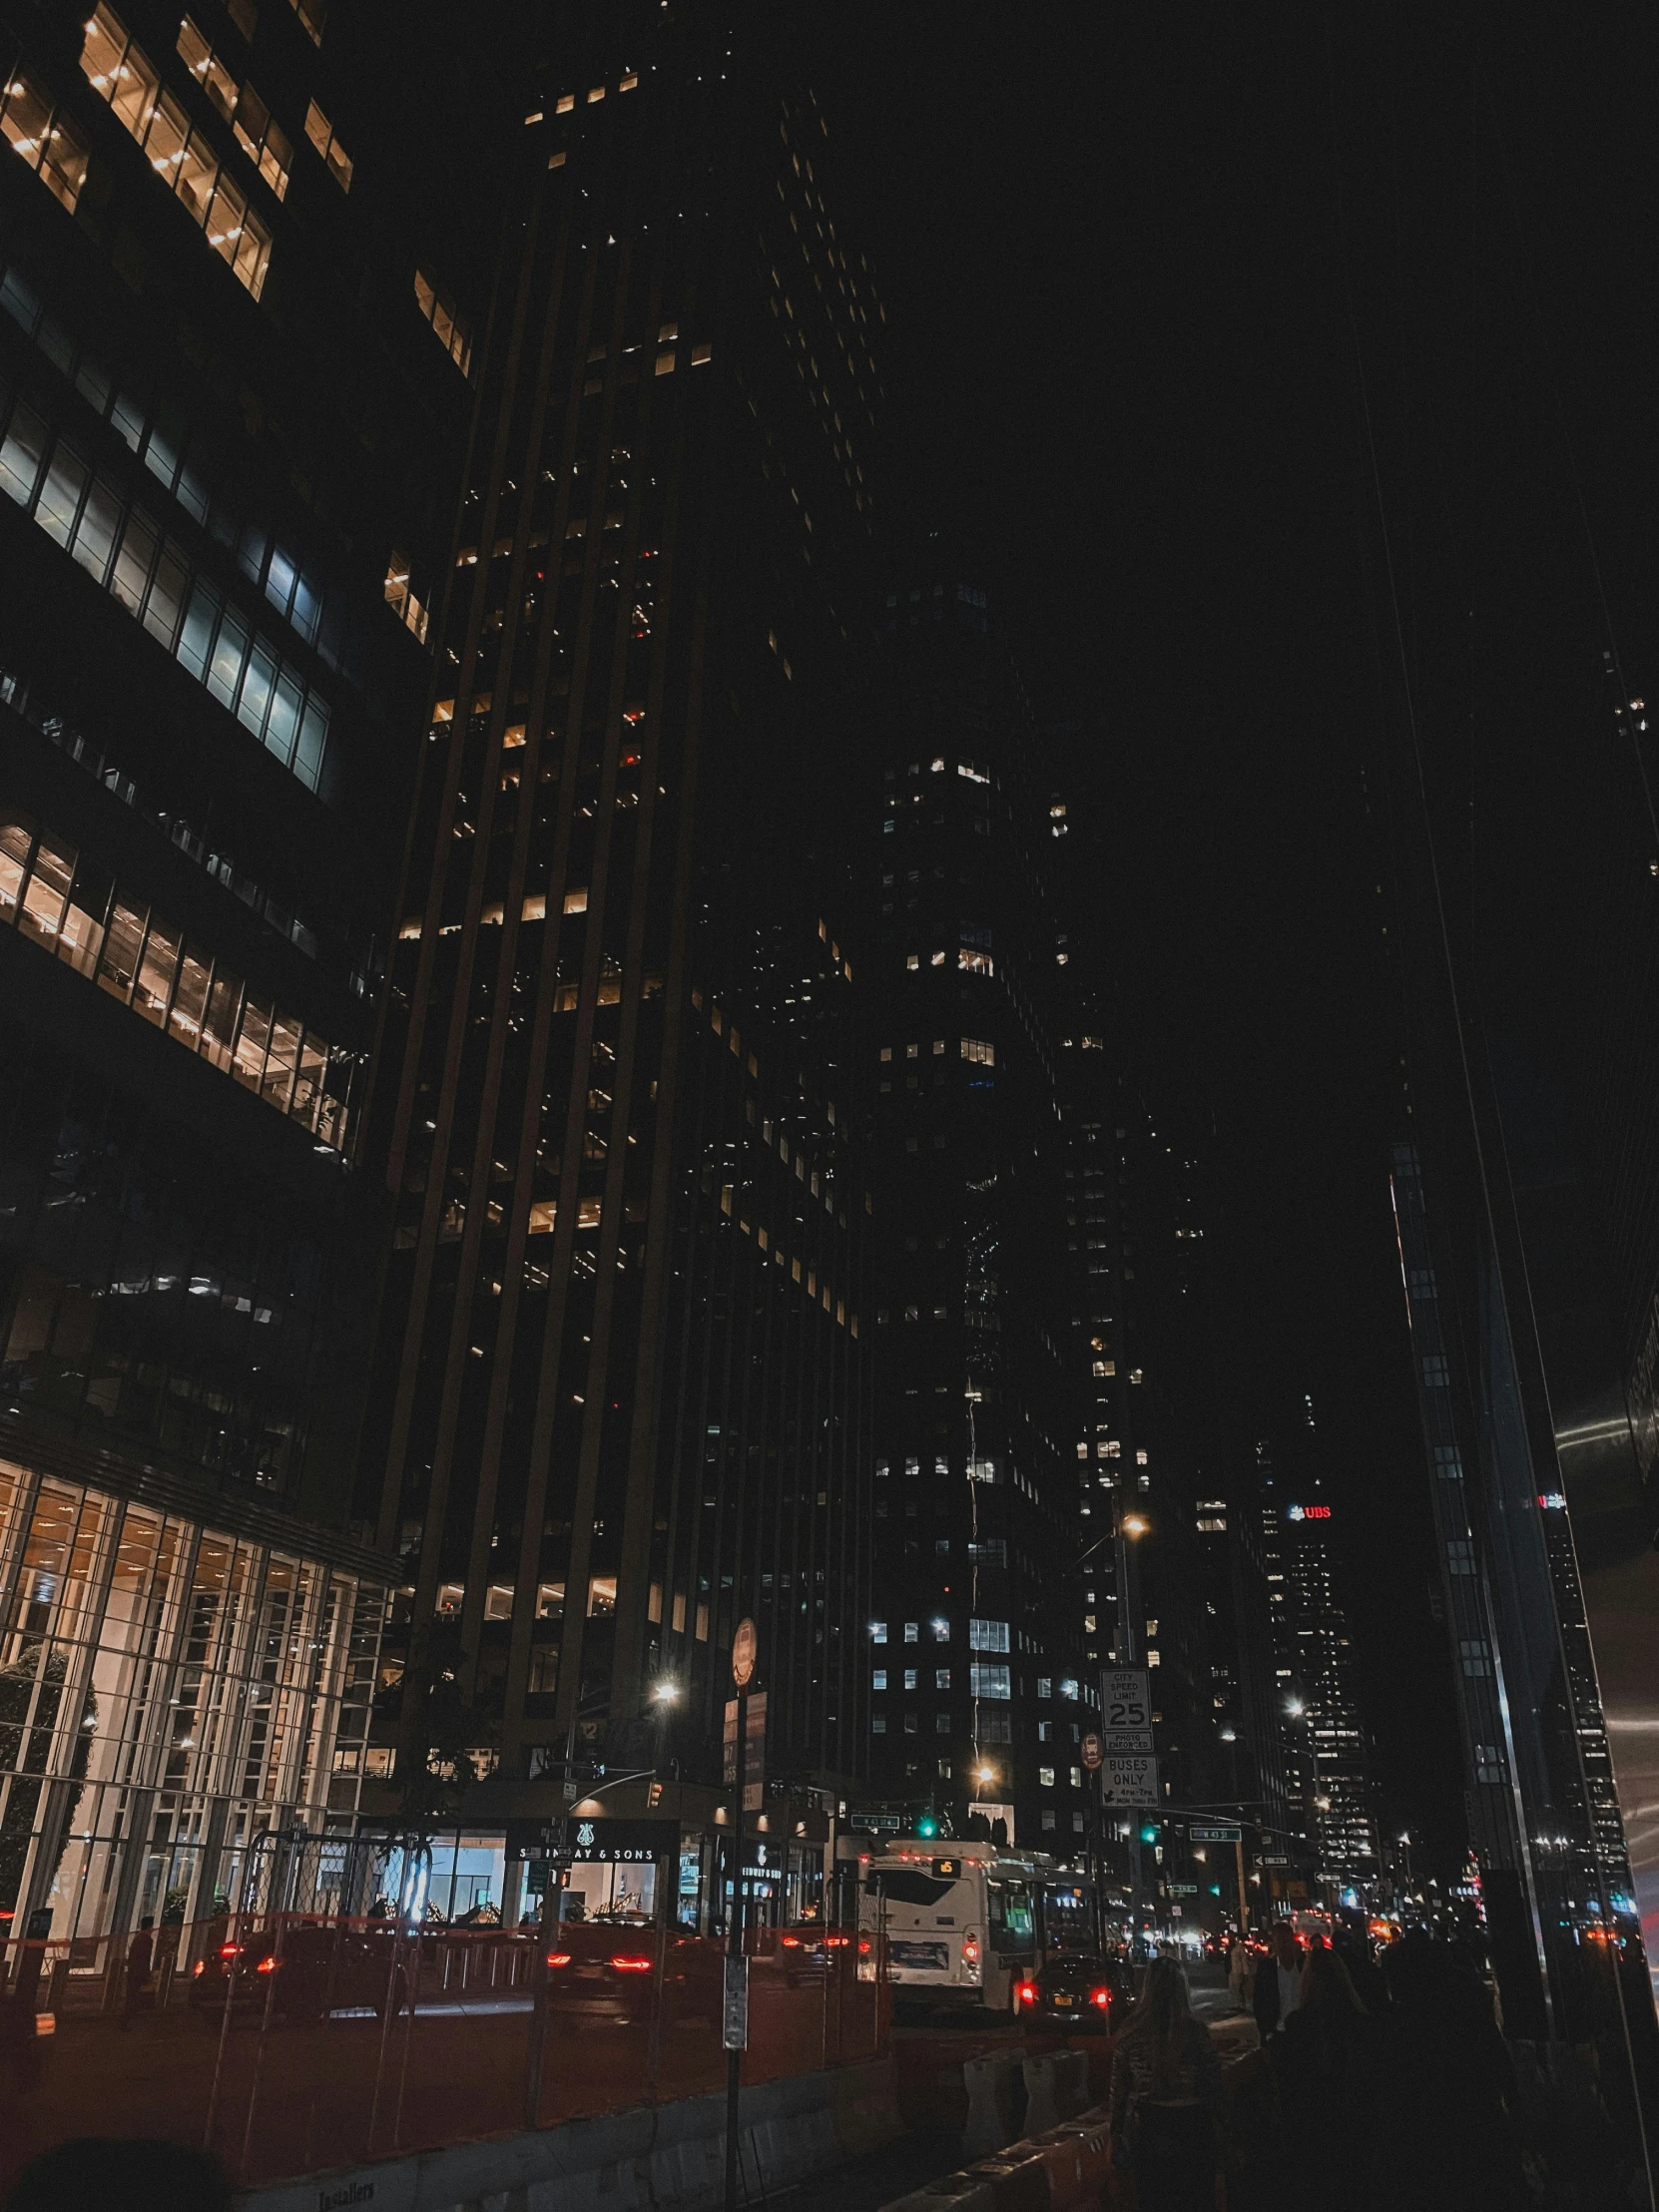 night scene looking over an urban area with several tall buildings